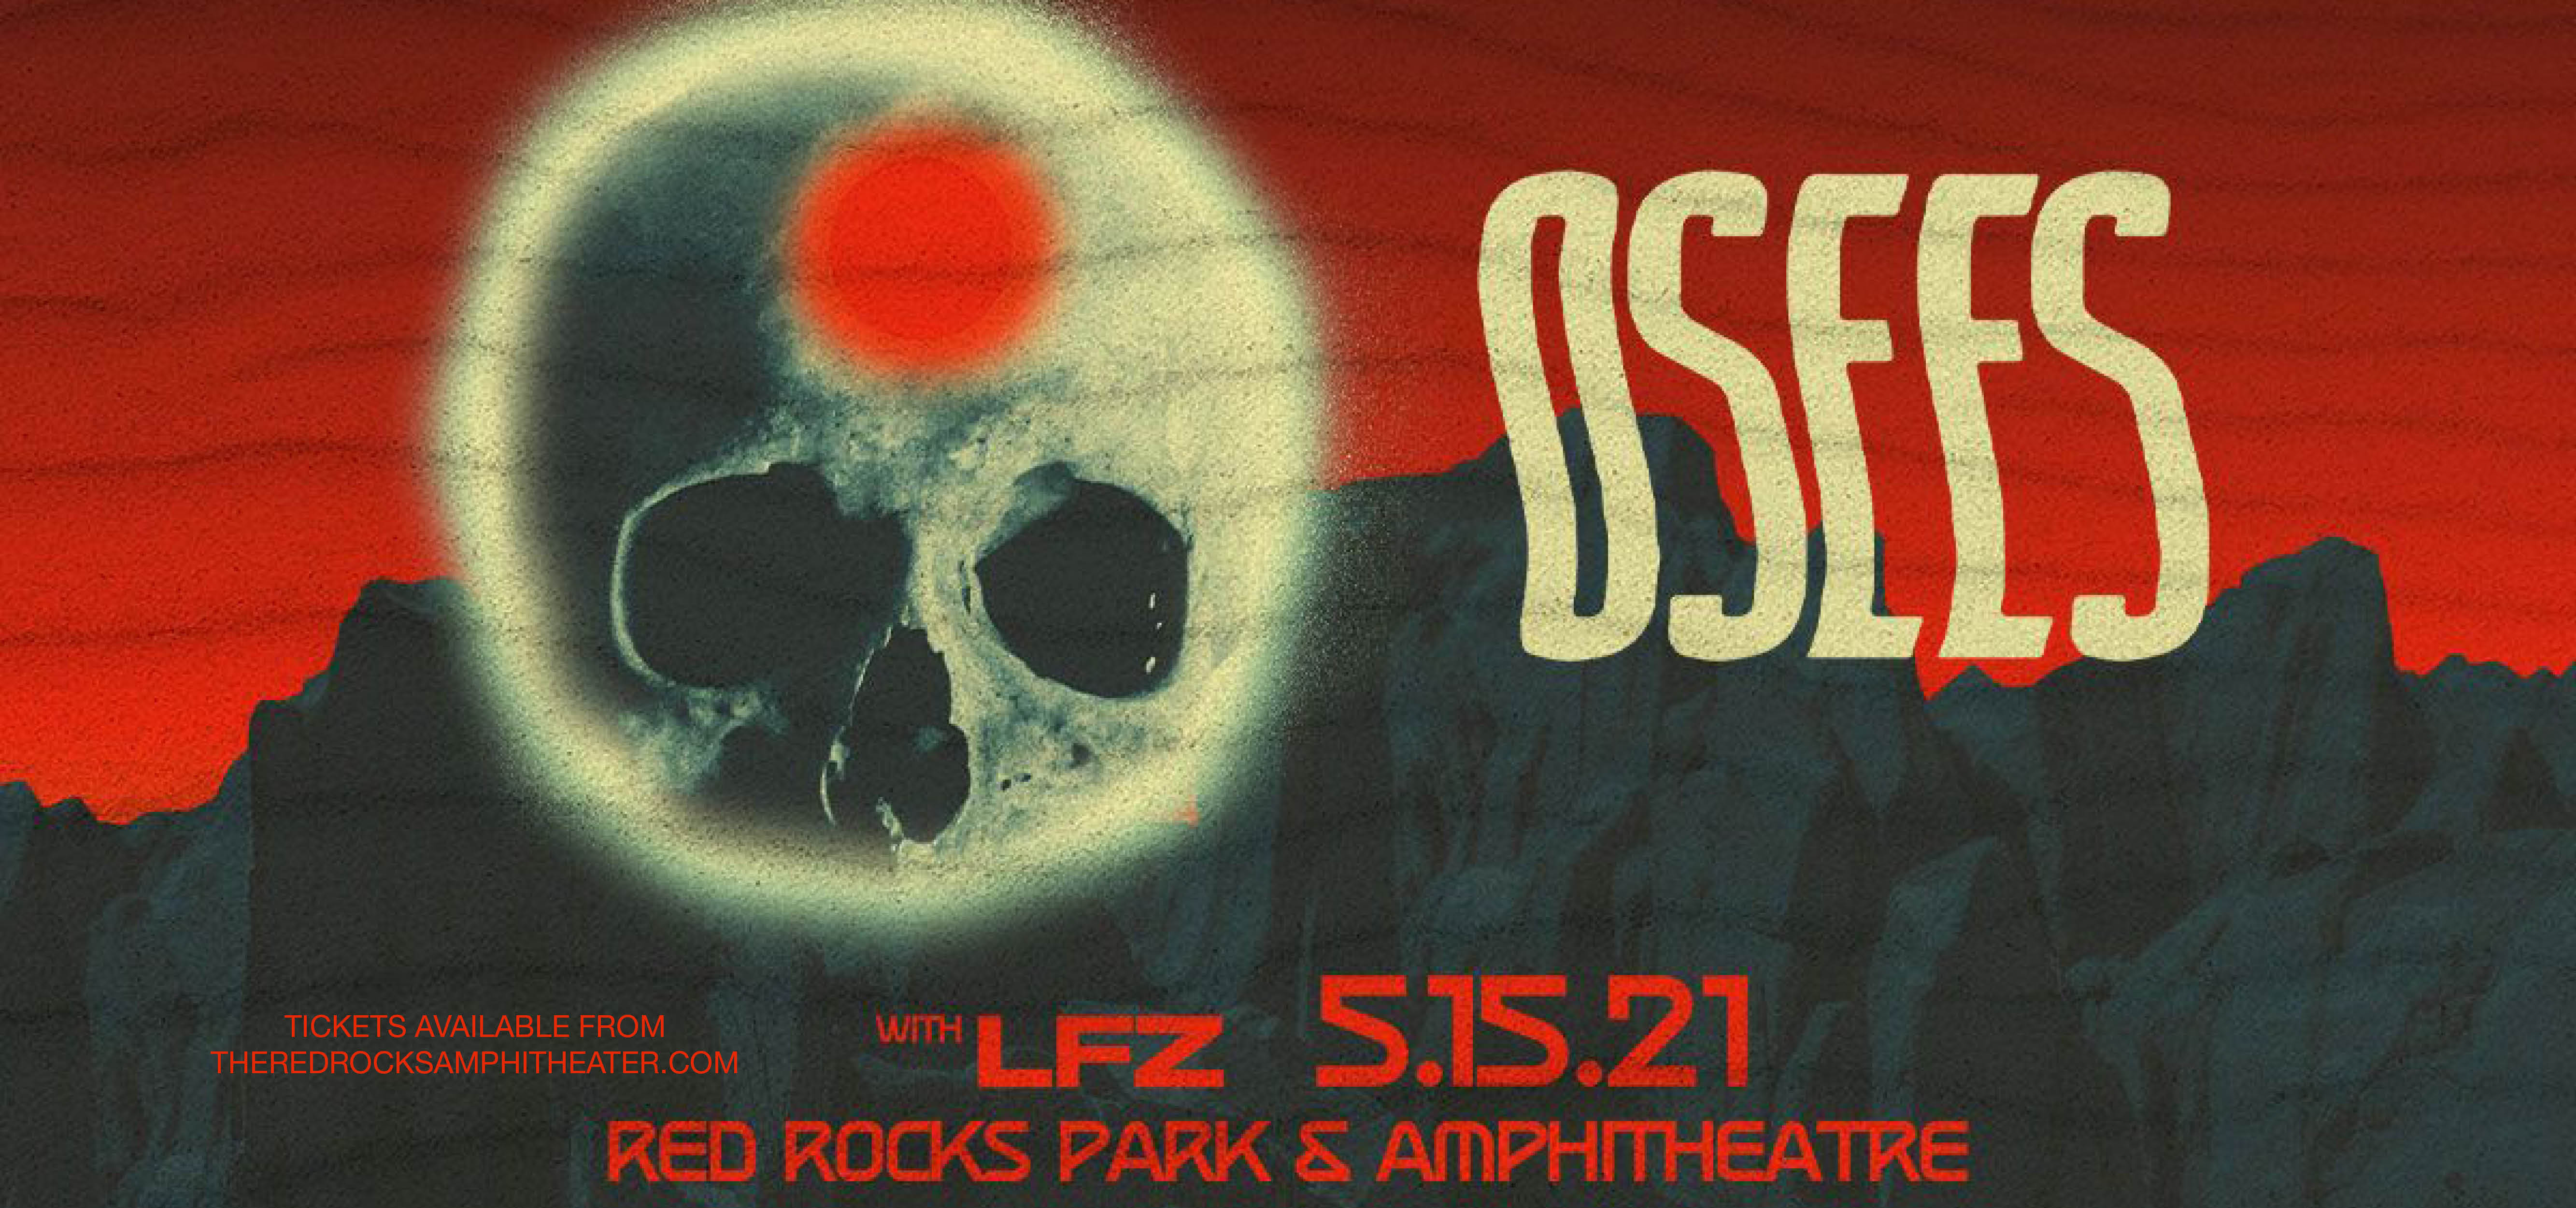 Osees at Red Rocks Amphitheater